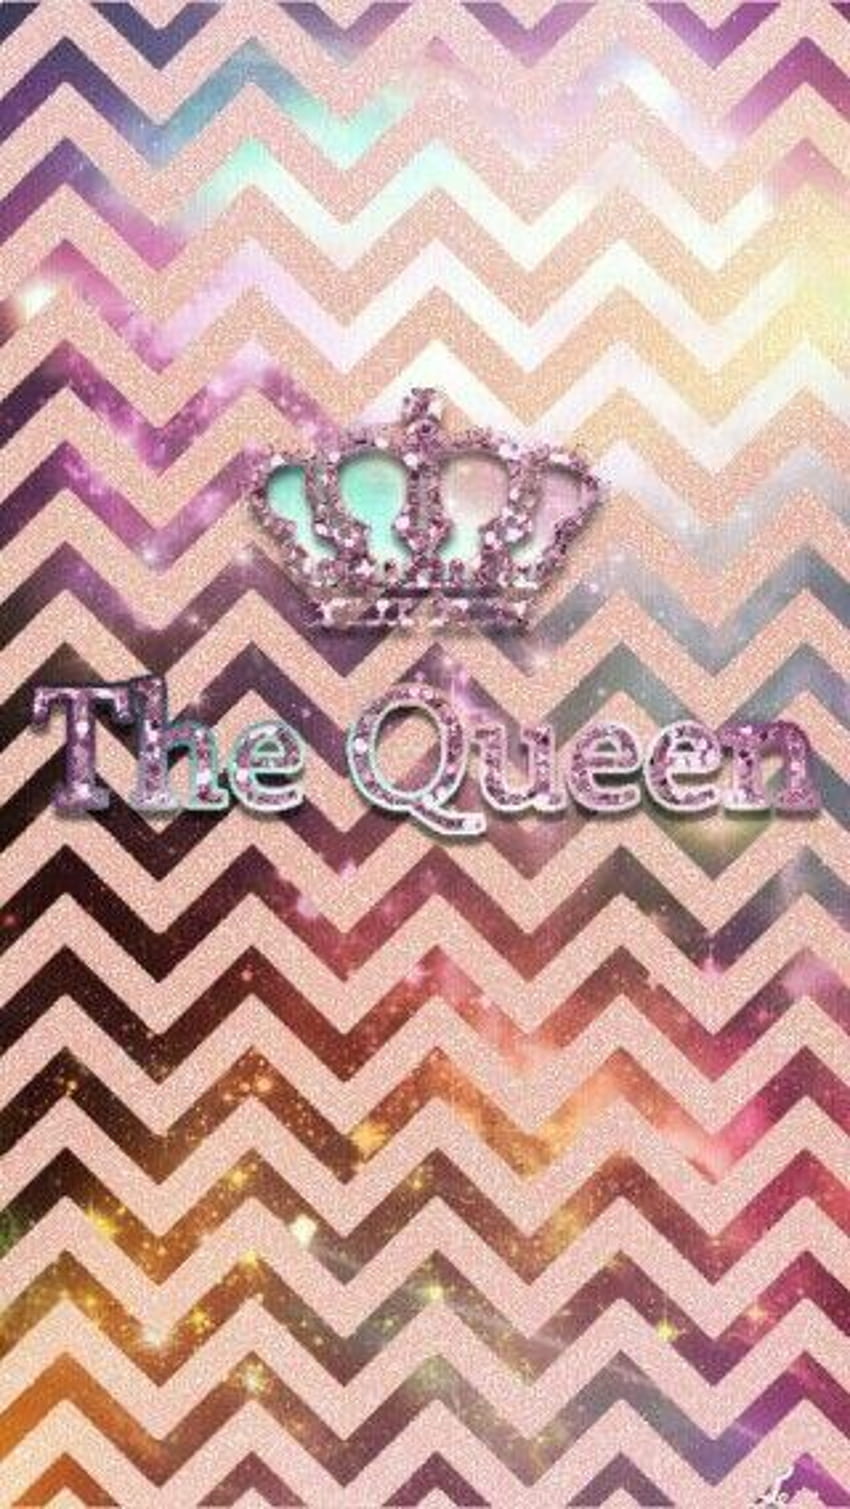 Queen B wallpaper by hjohnson2609  Download on ZEDGE  62fc